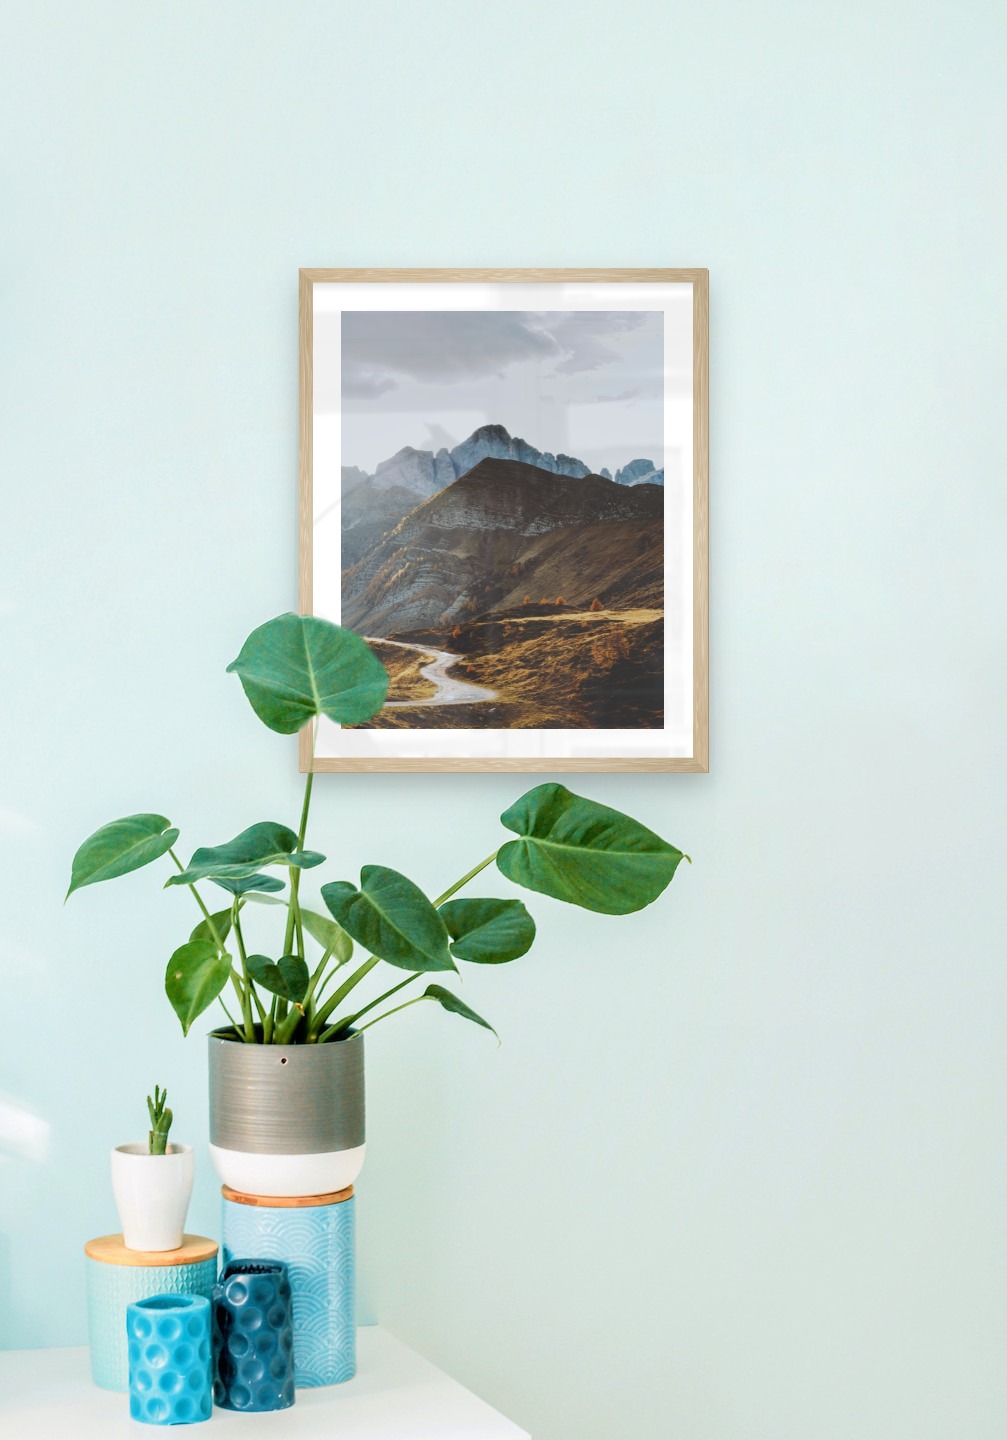 Gallery wall with picture frame in wood in size 40x50 with print "Road among the mountains"